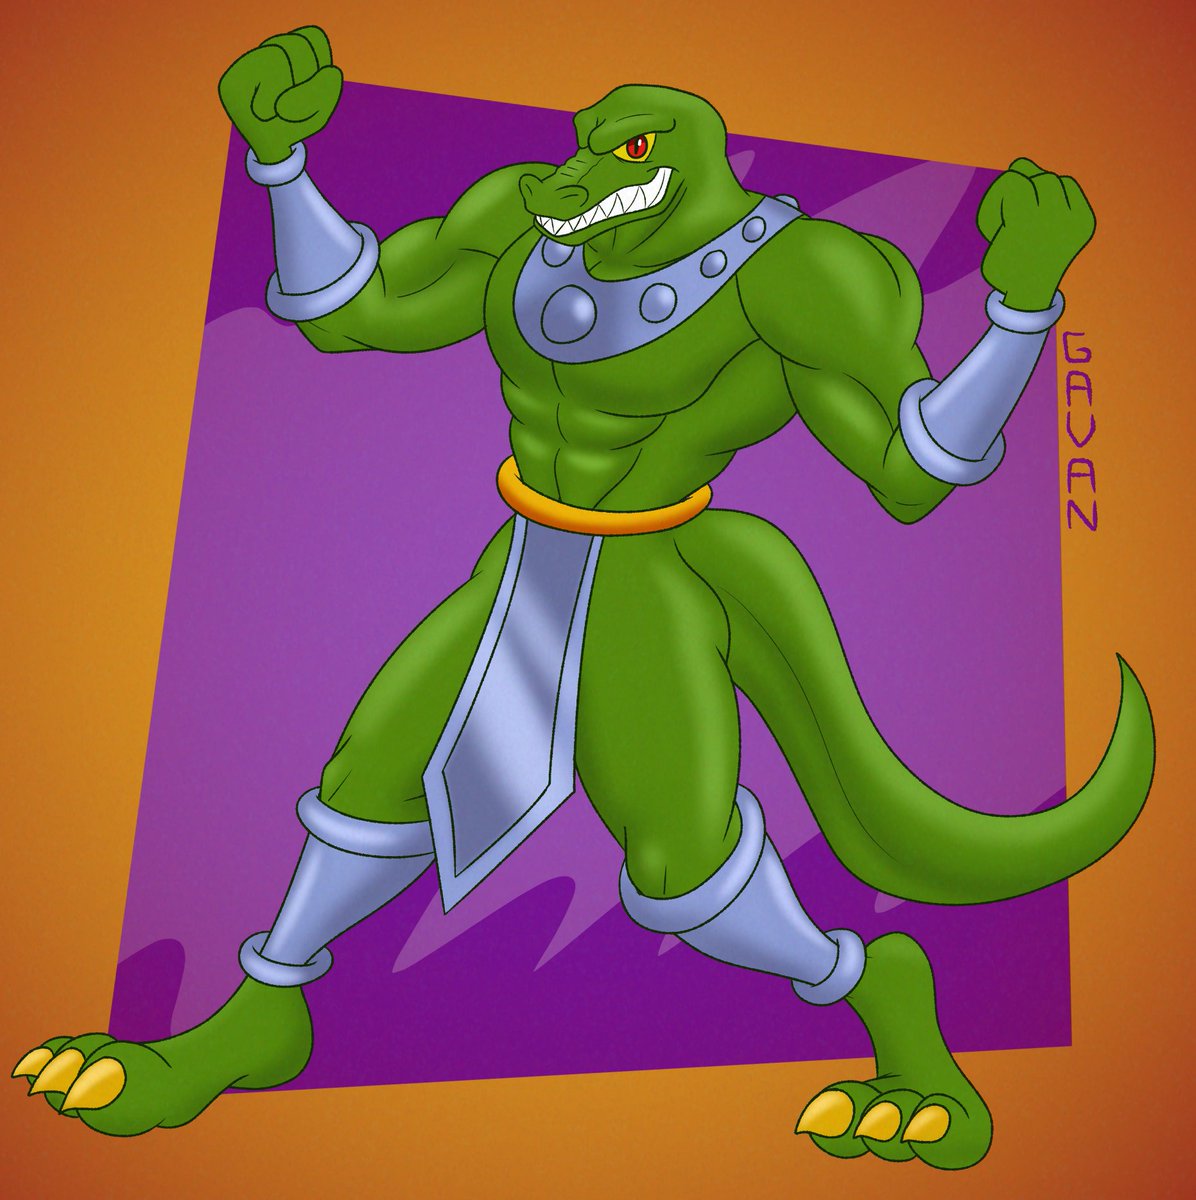 Here's a mighty Lizardman, showing off his mighty muscles. 'Special' version linked in the post down below.
#TheKingofDragons